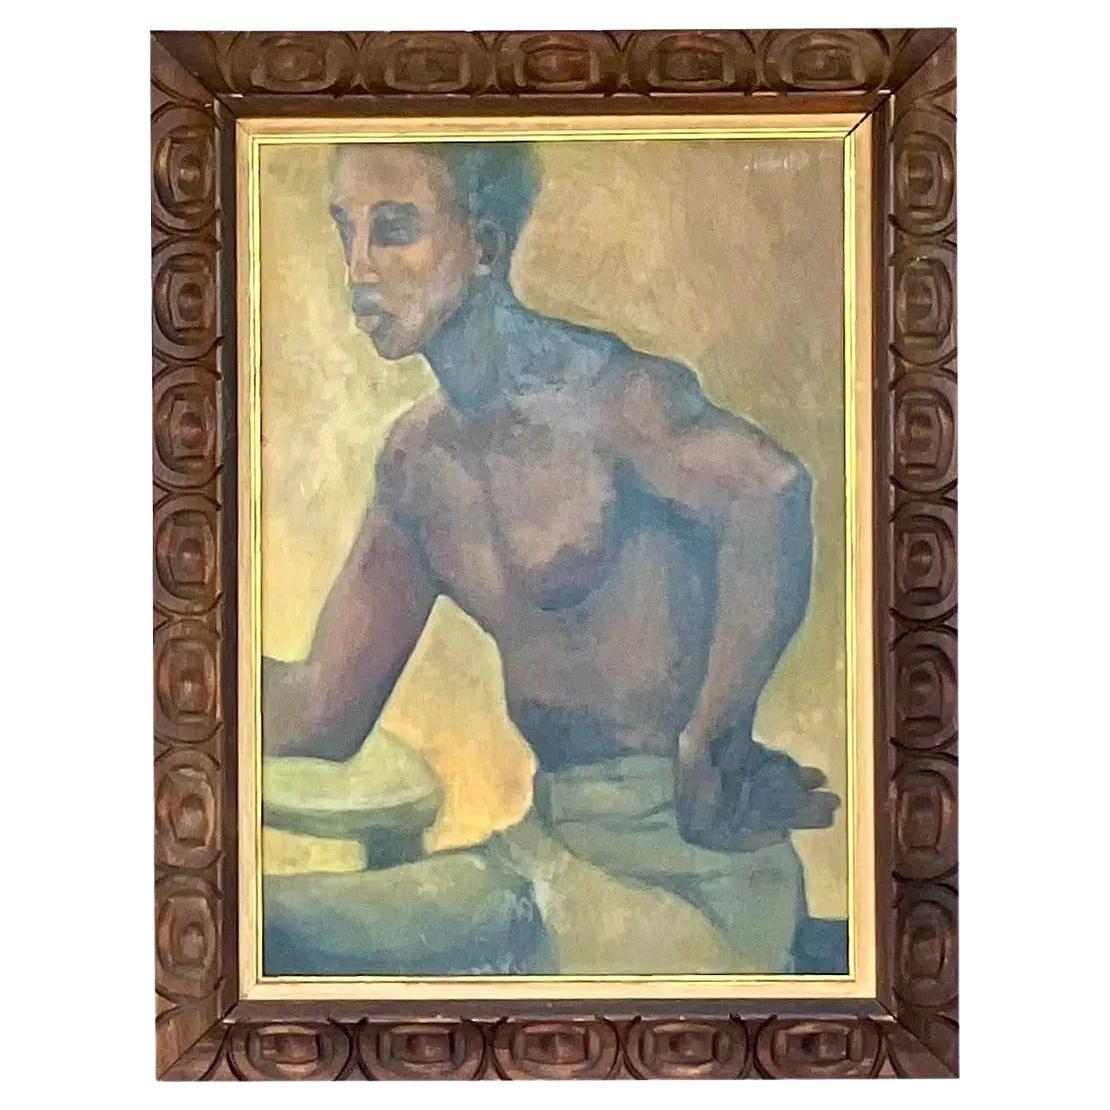 Vintage Original Oil Painting of a Man, Signed